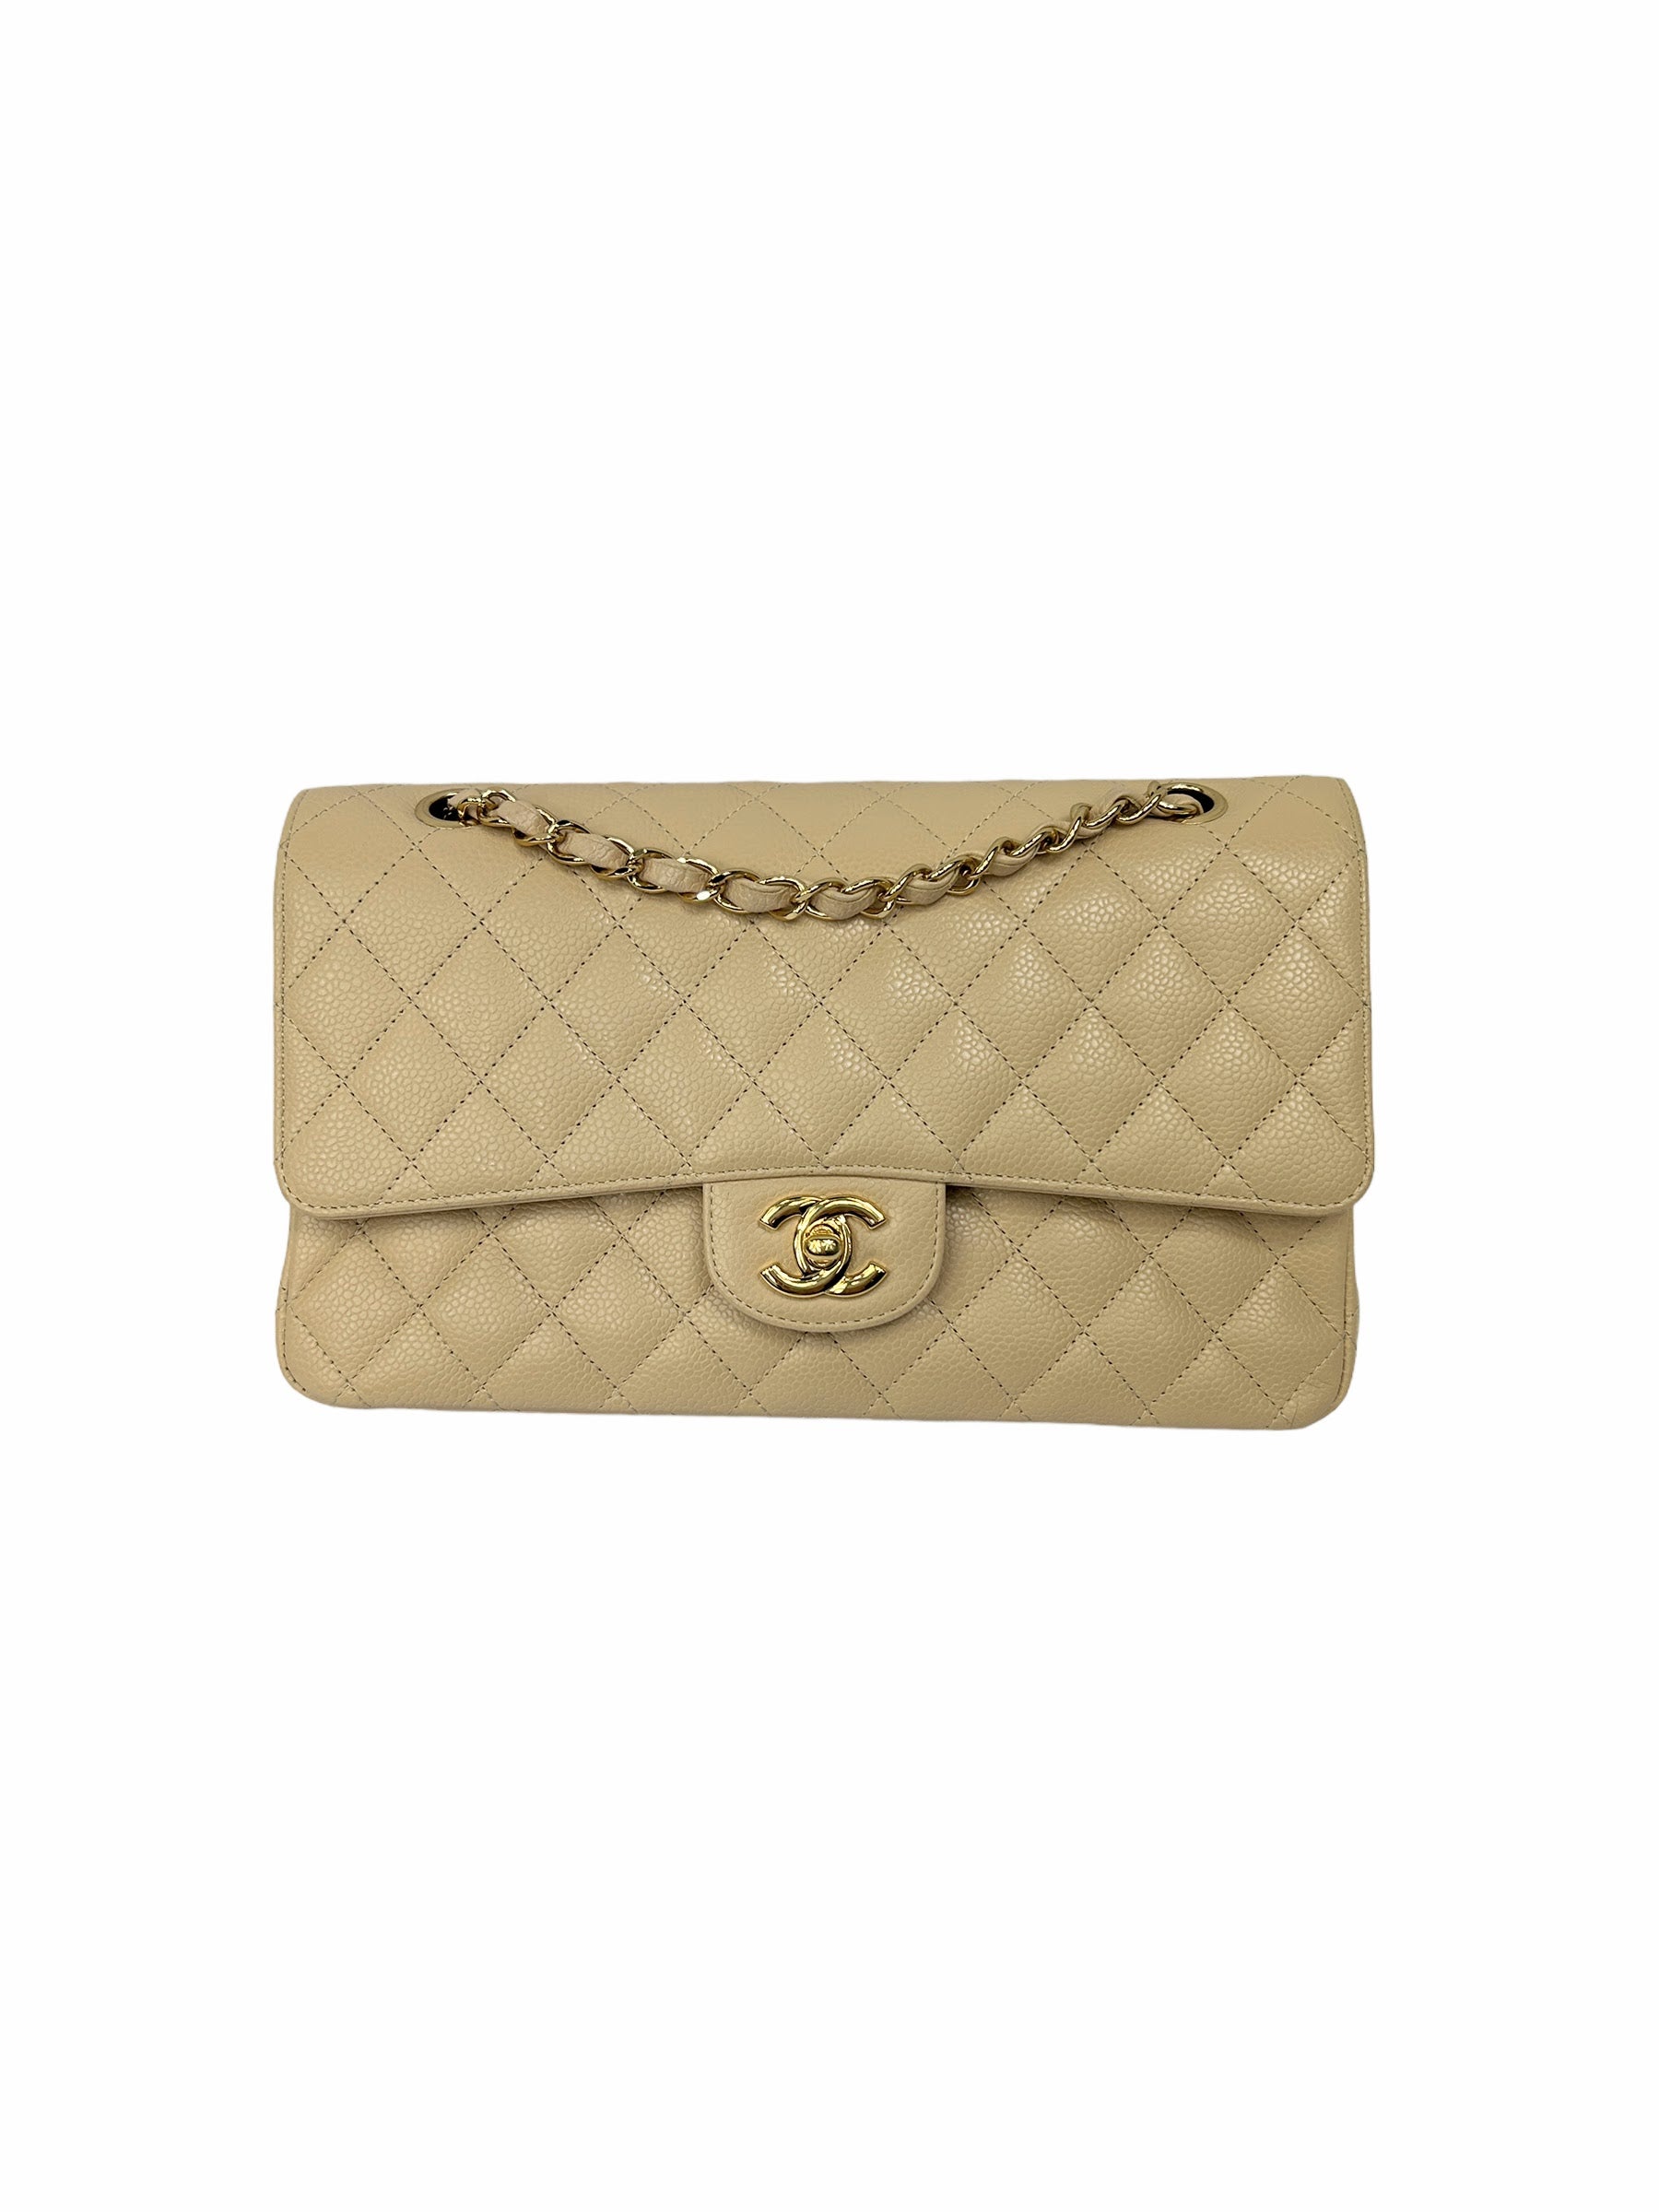 Nude Caviar Quilted Medium Classic Double Flap w/GHW